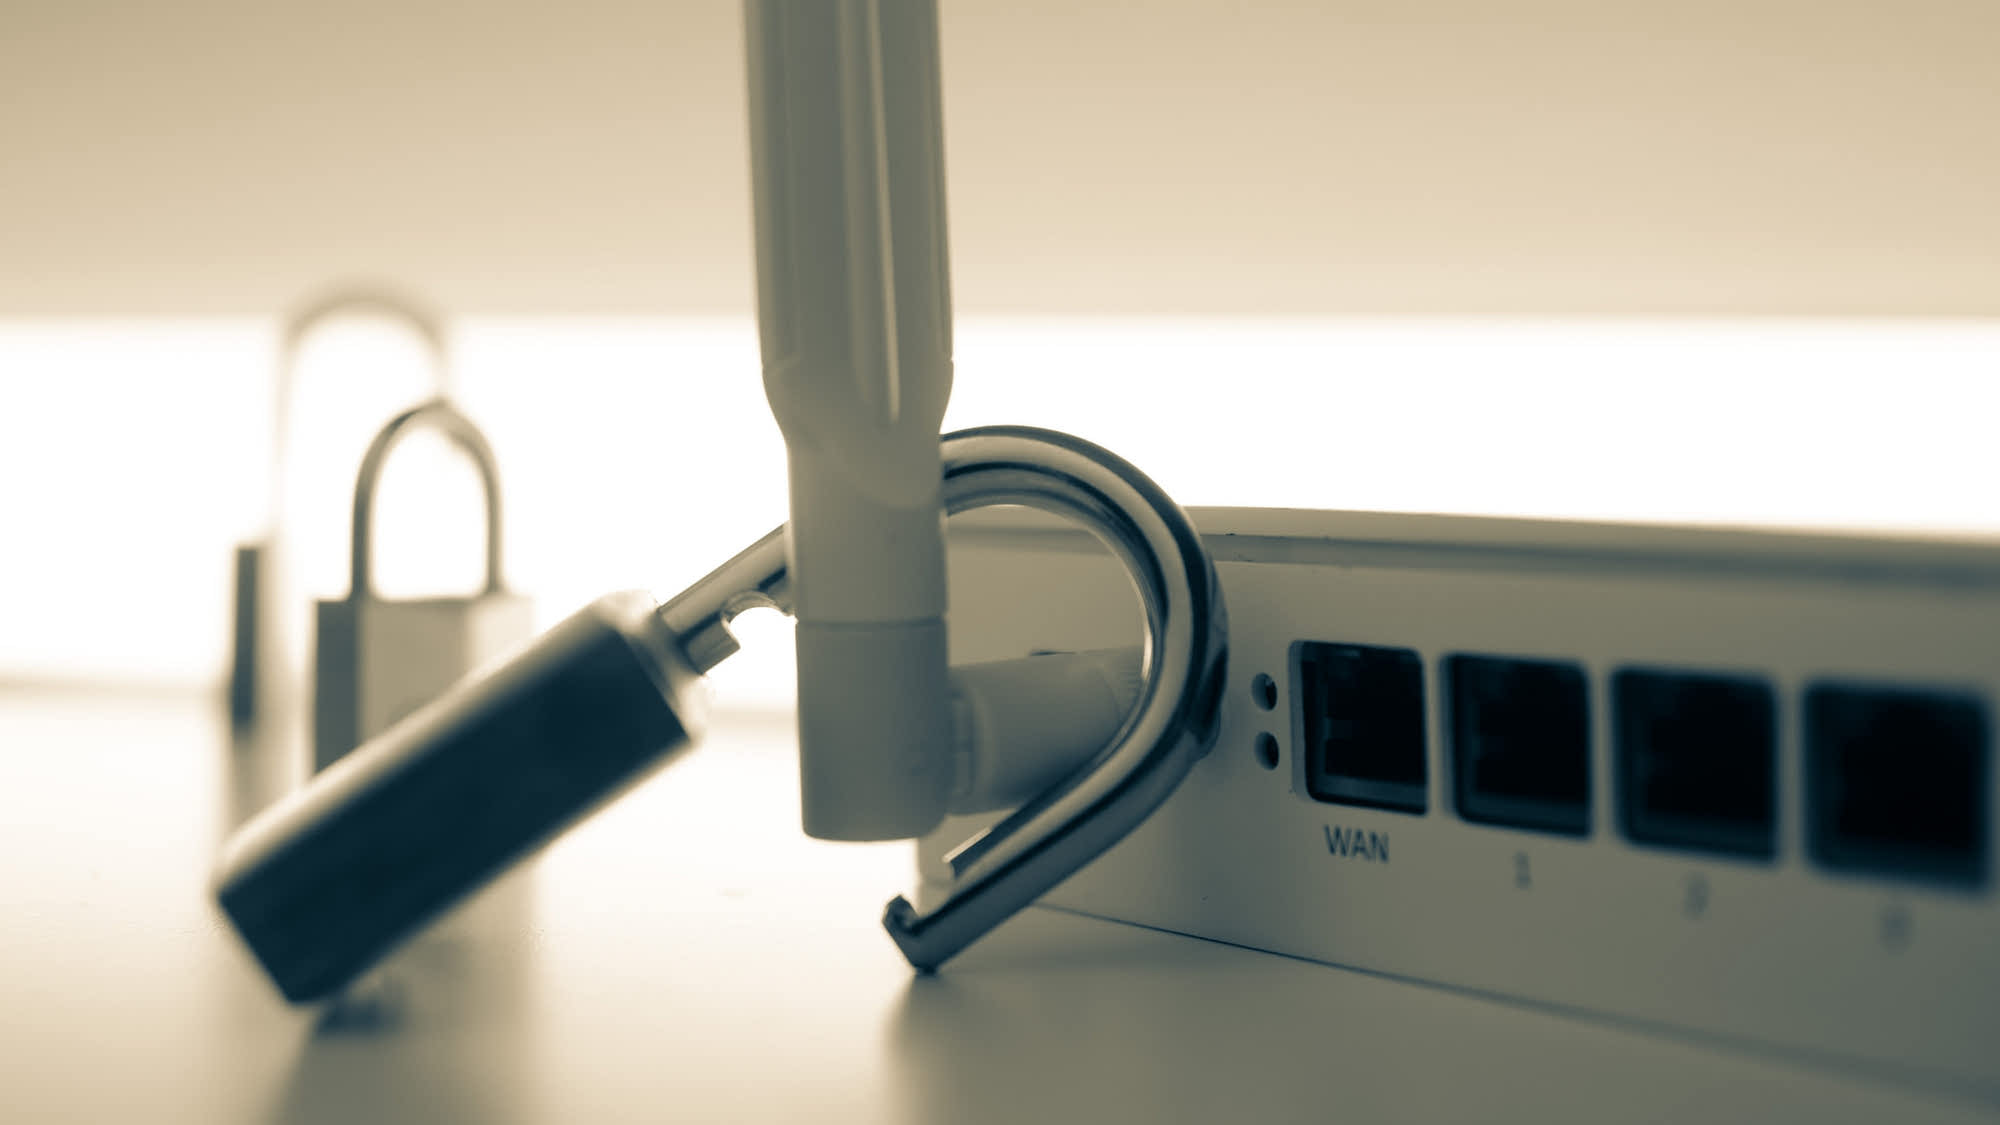 Vilfo VPN router review: Not designed for security or privacy \u2013 Part 3\/4 | Ctrl blog